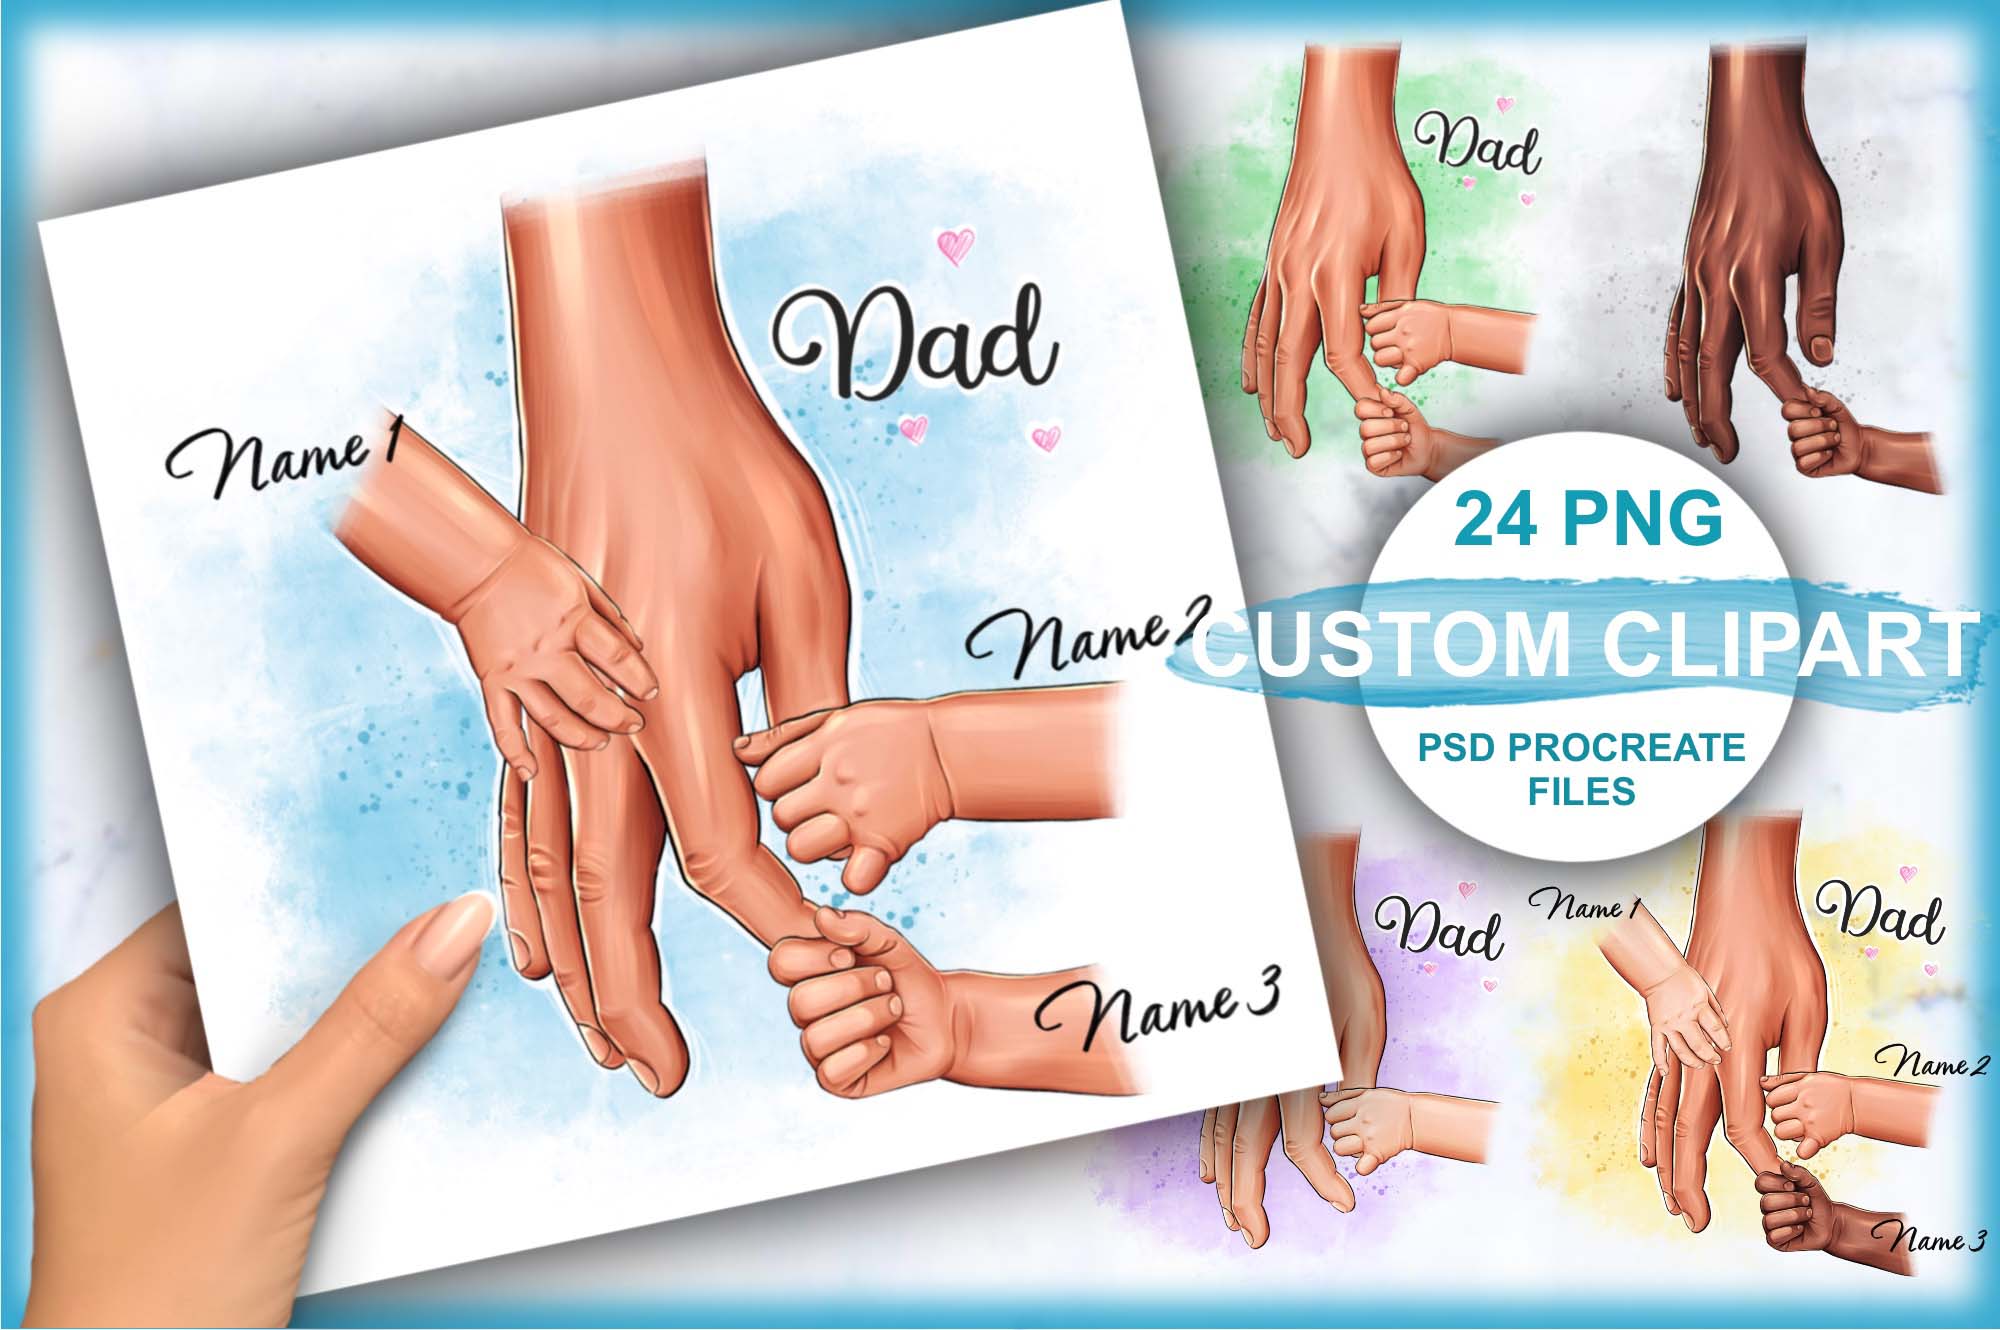 Family Clipart Parents And Kids Facebook Image.